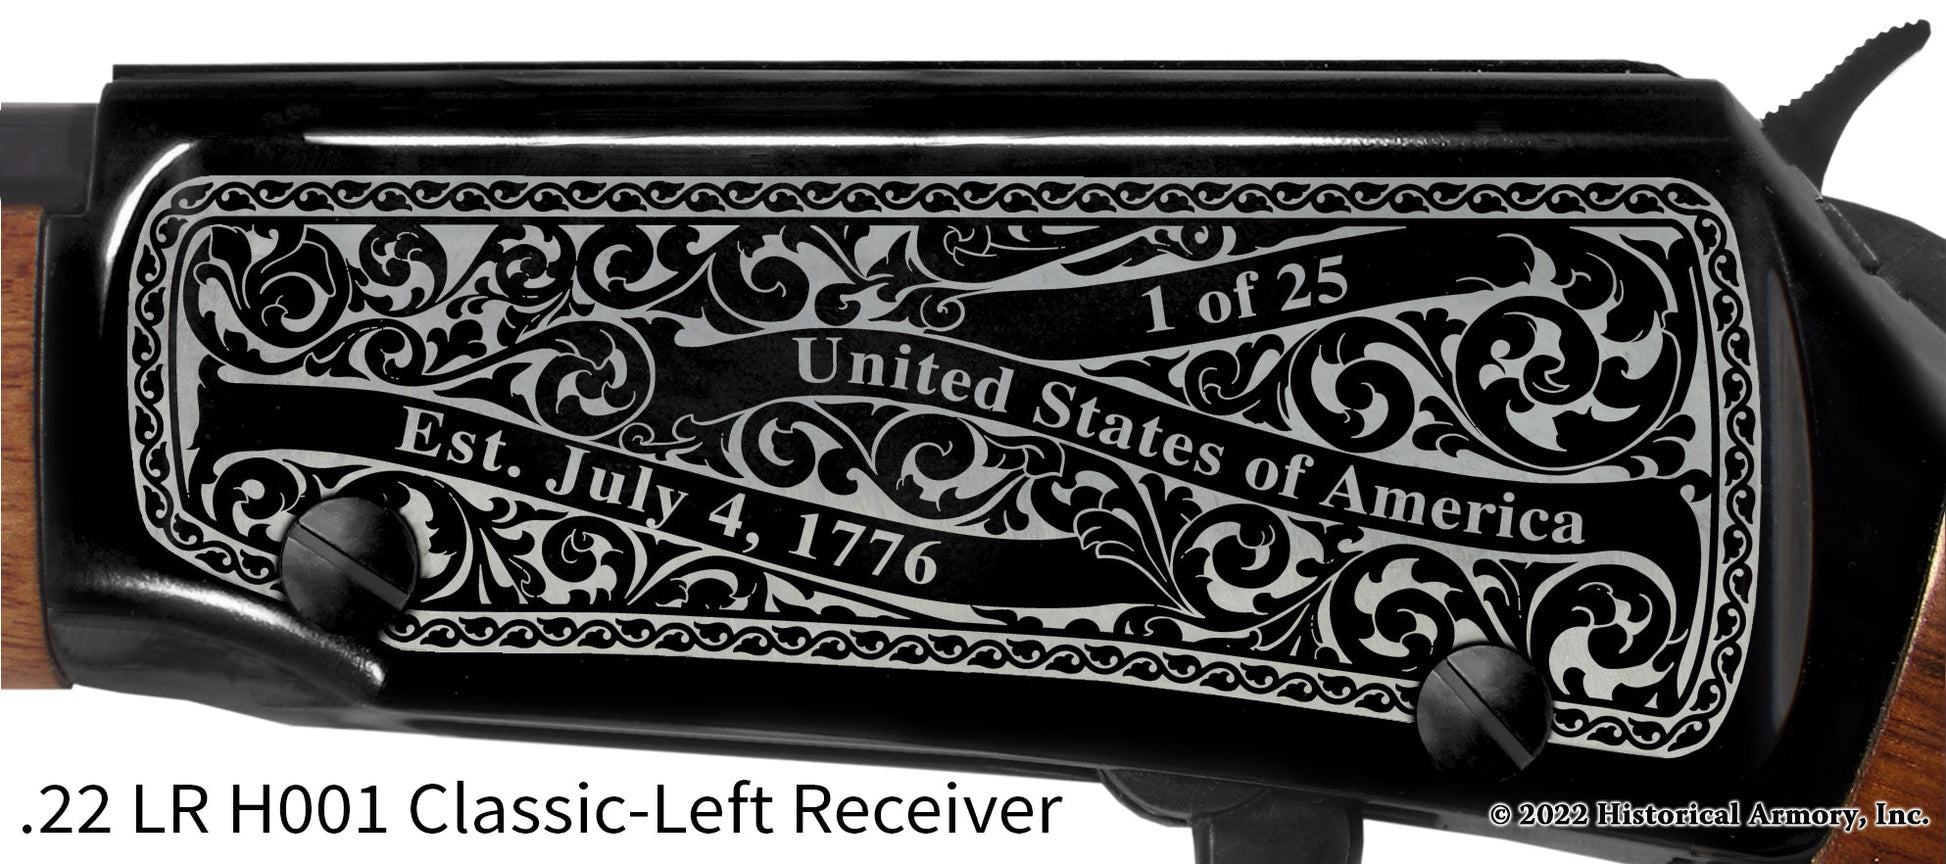 Summers County West Virginia Engraved Henry H001 Rifle